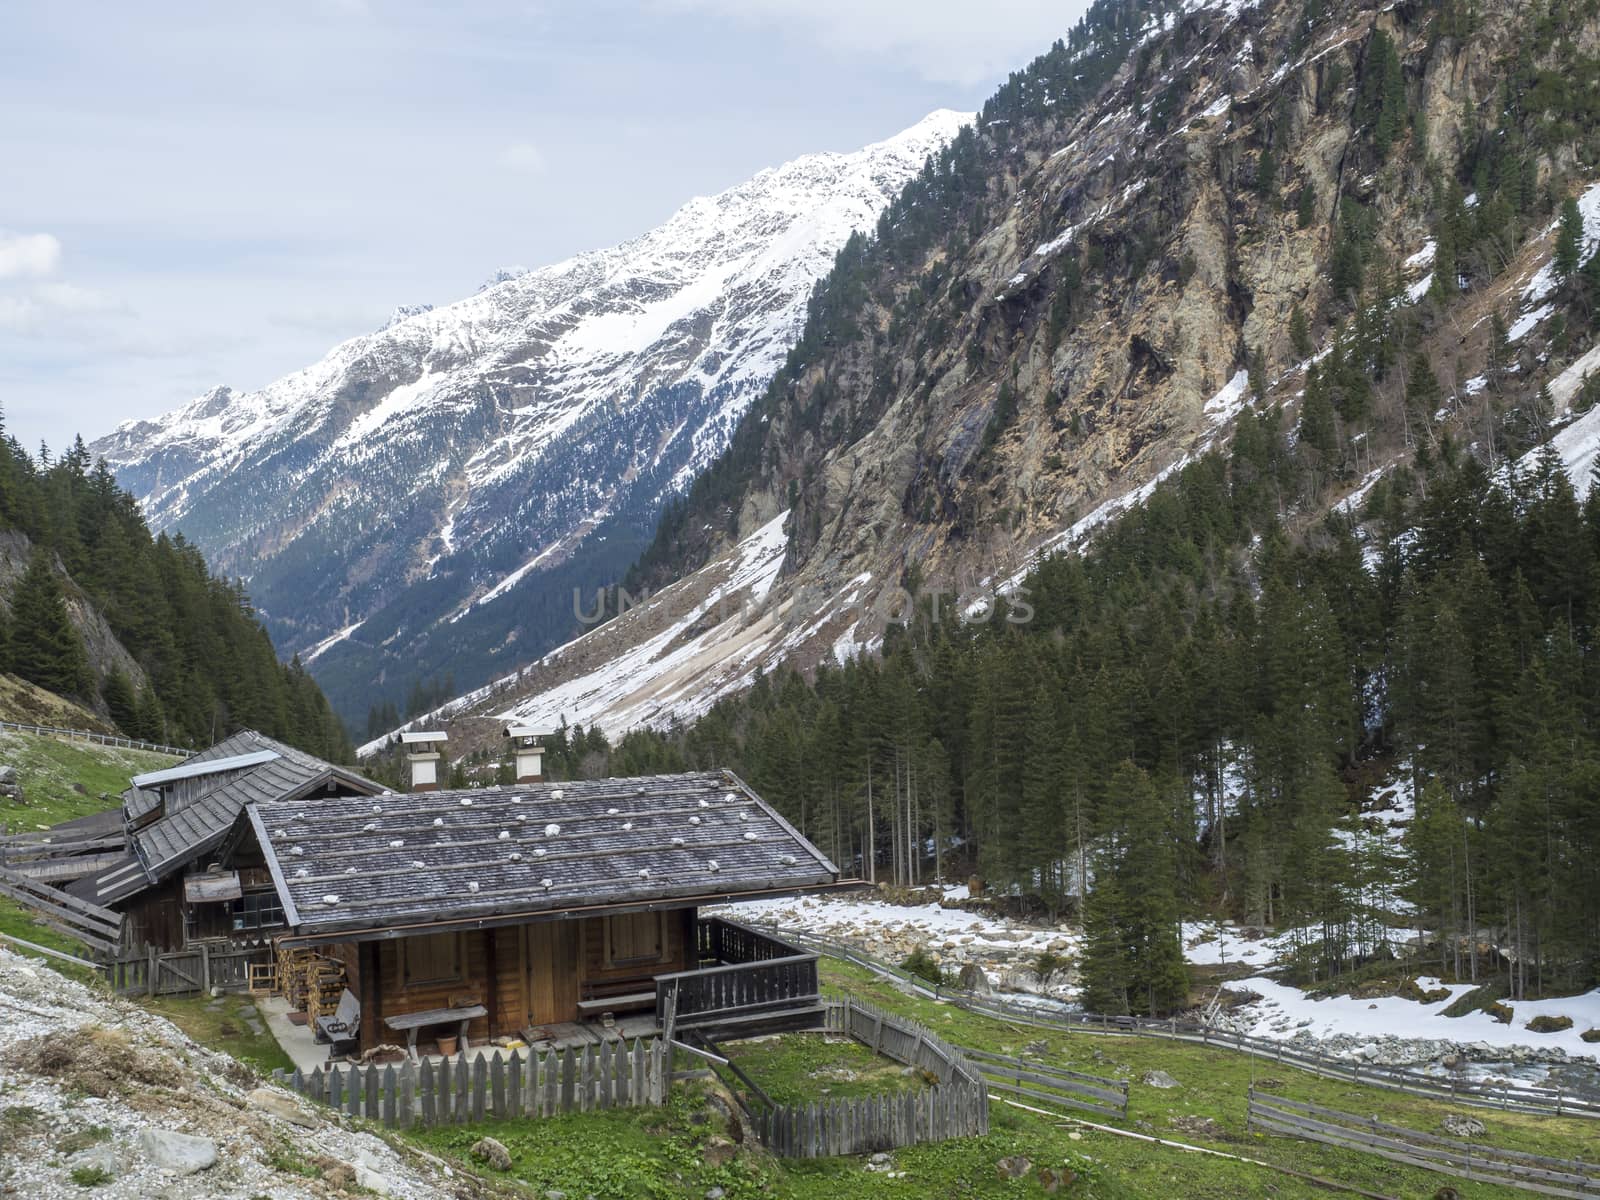 Alpine wooden cottage near GRAWA Glacier Waterfall situated in Stubai Valley, Tyrol, Austria. Spring mountain river and trees landscape natural environment. Hiking in the alps. by Henkeova